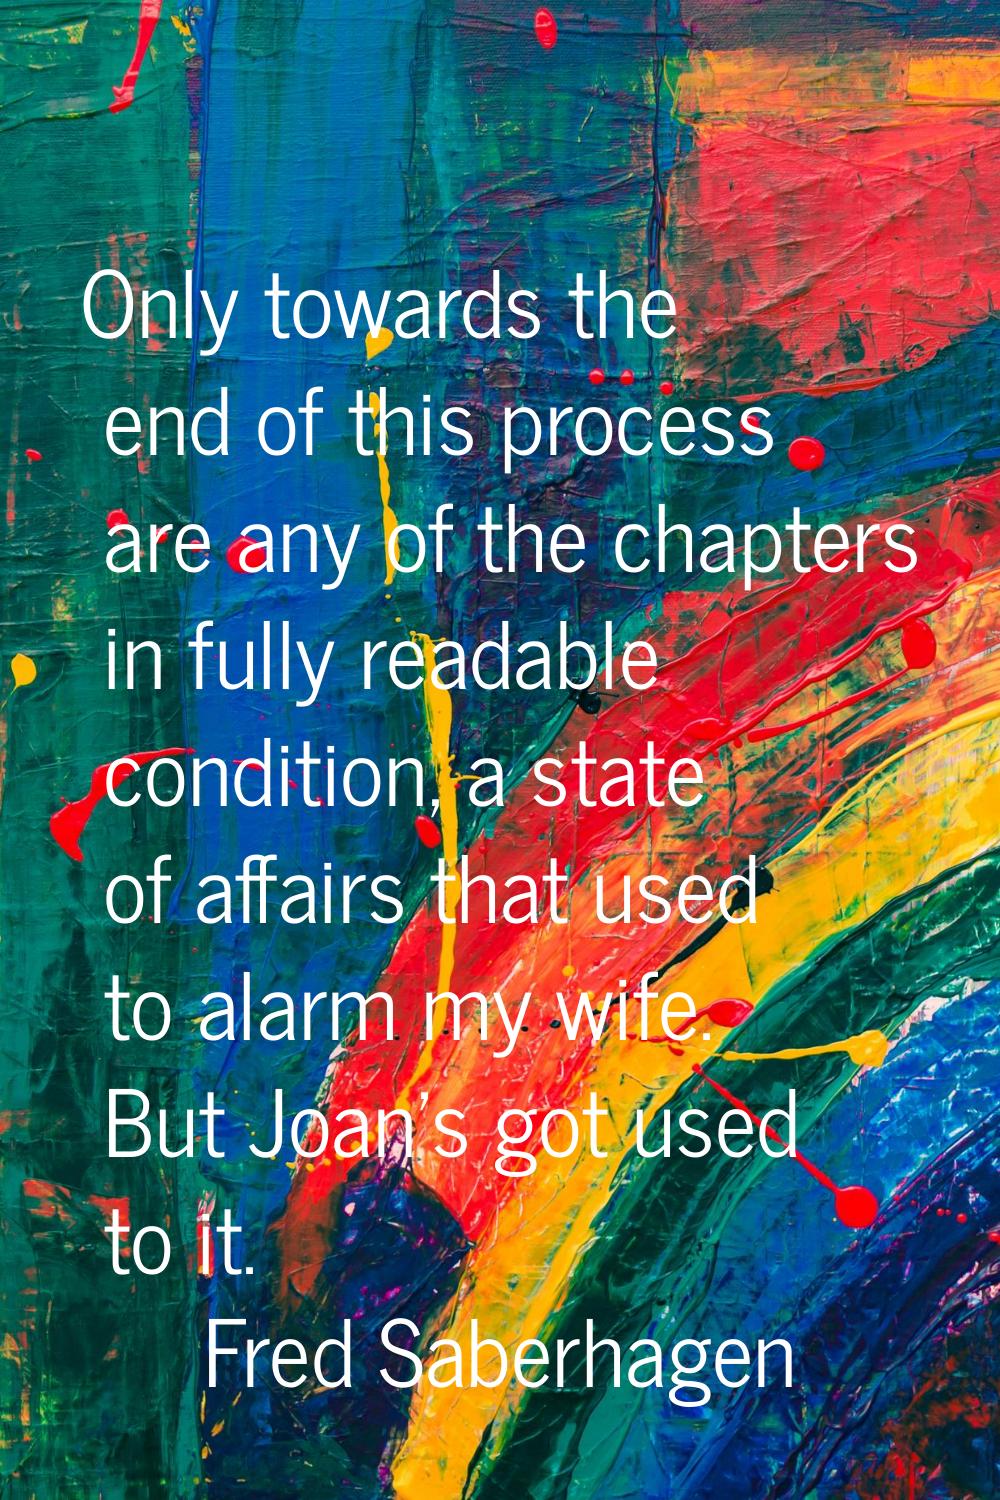 Only towards the end of this process are any of the chapters in fully readable condition, a state o